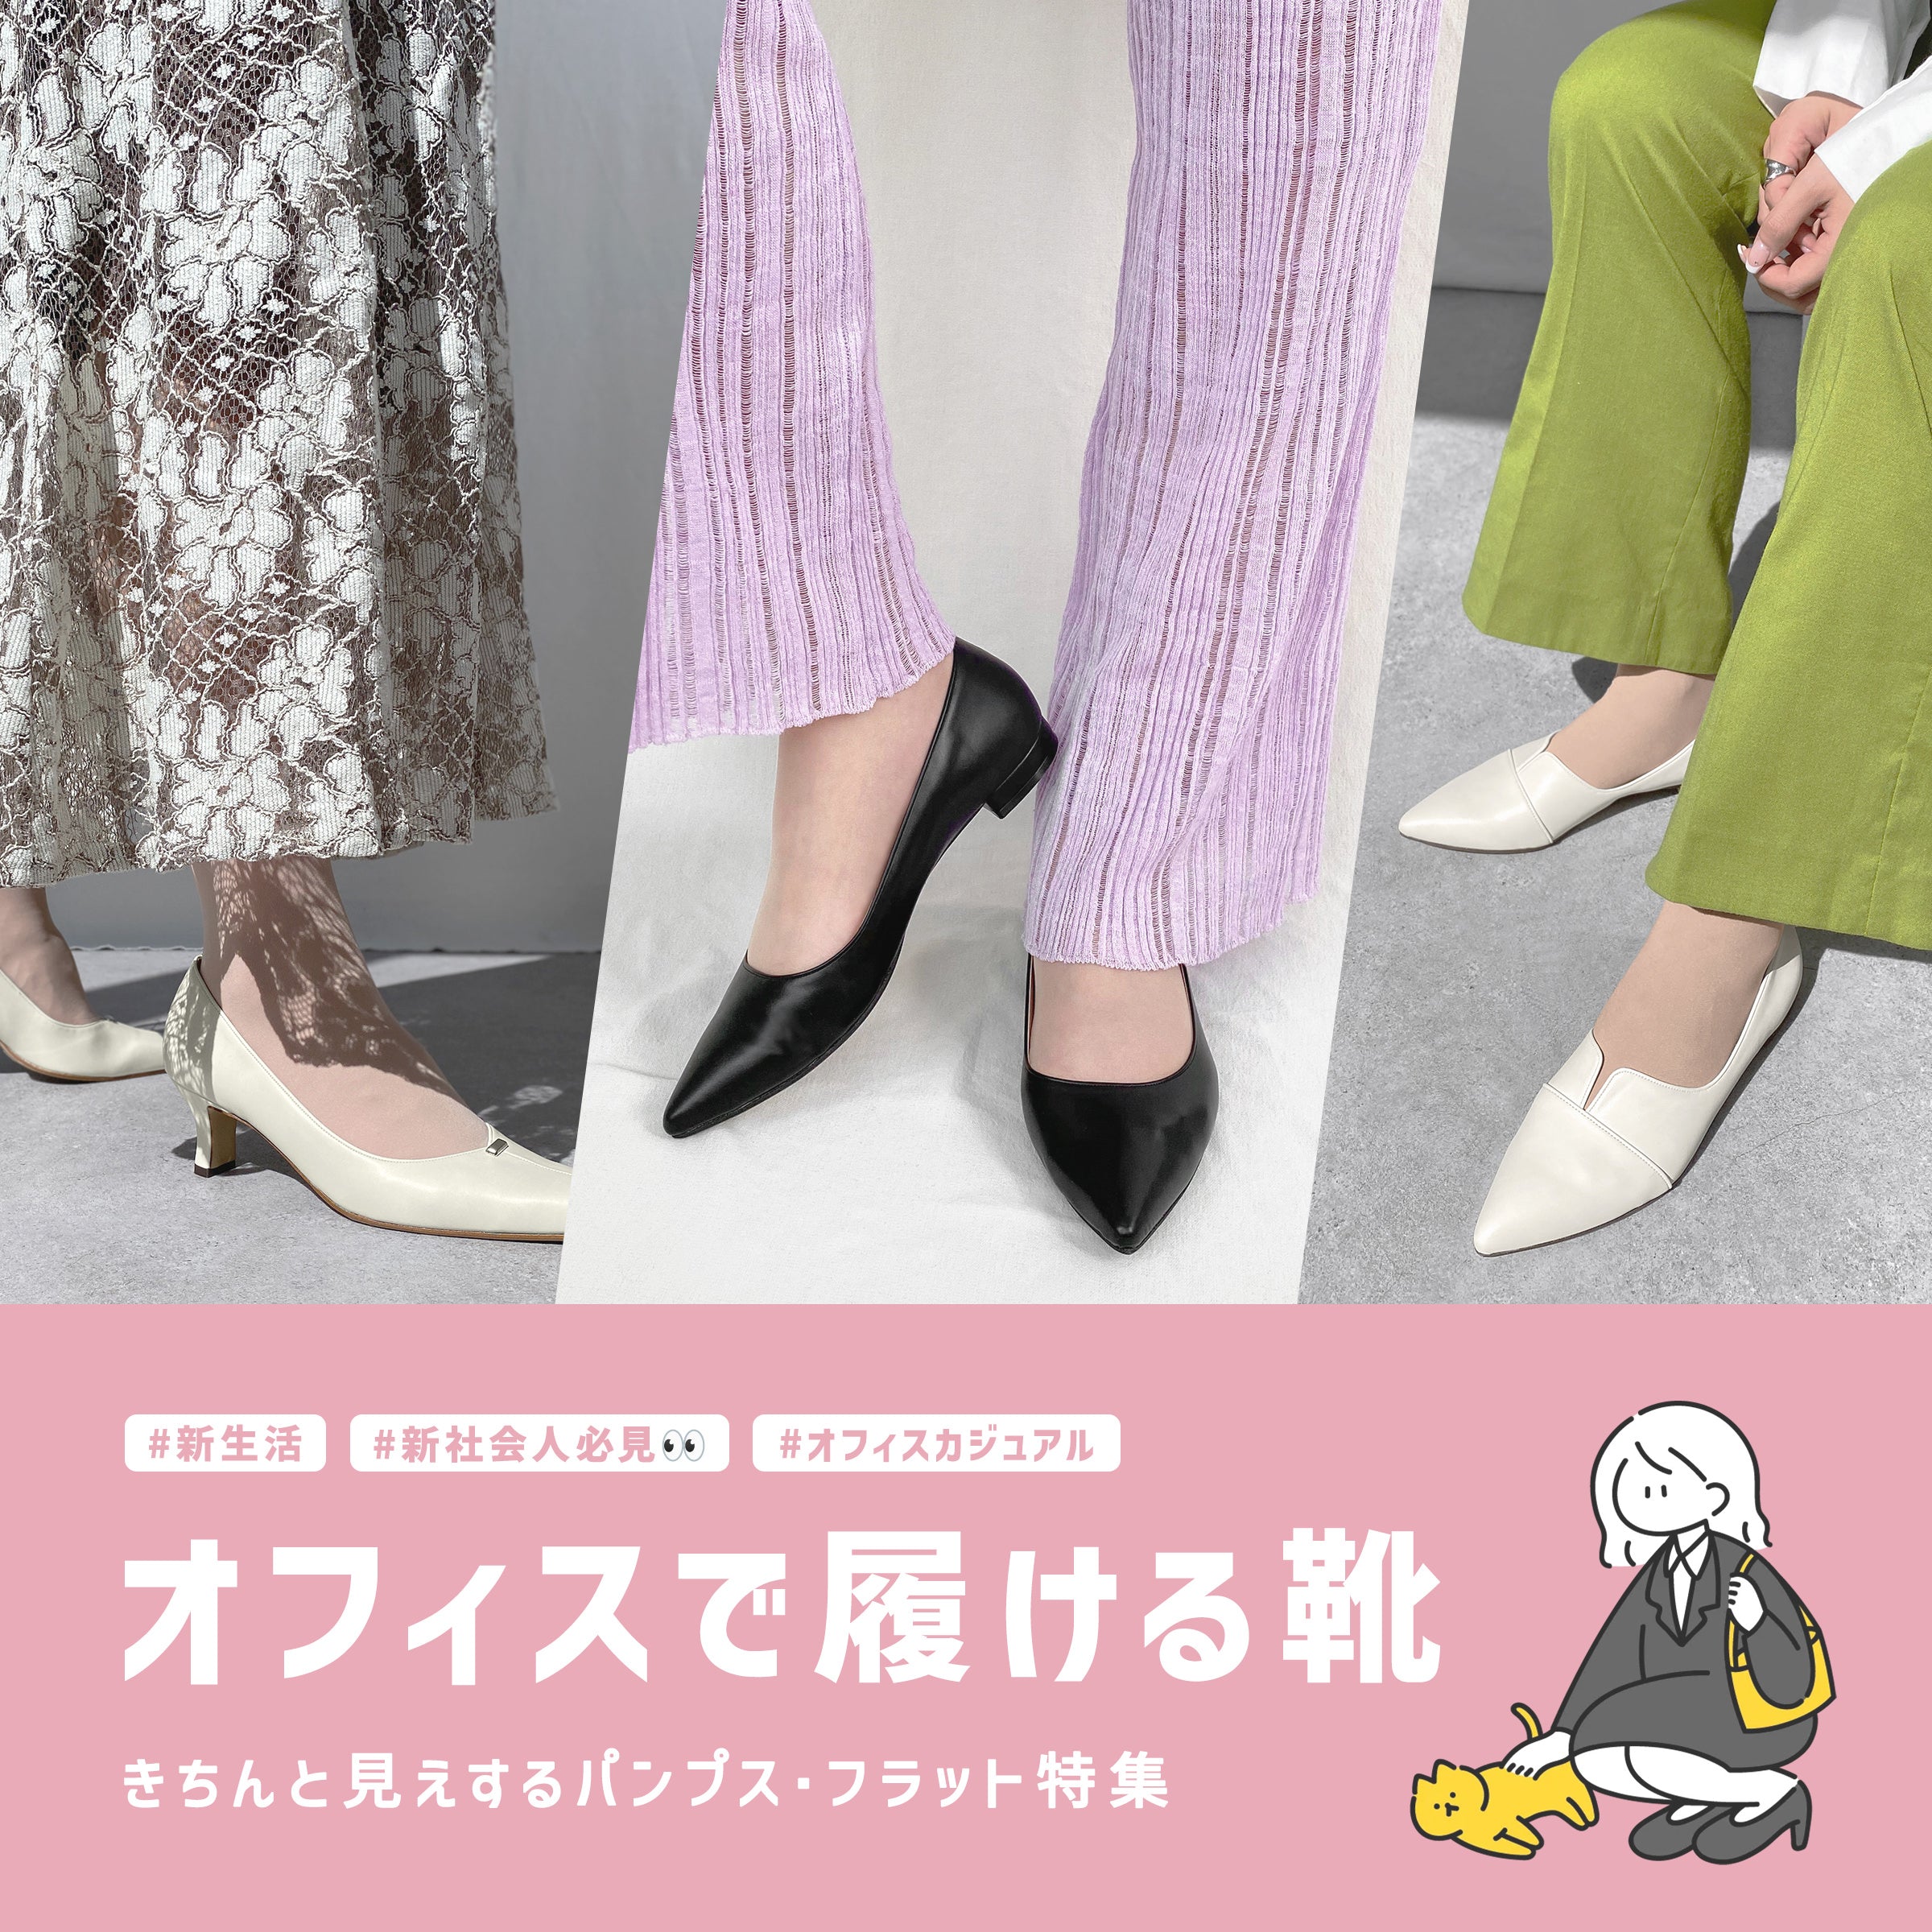 Towards a new life! Featured shoes that can be worn in the office